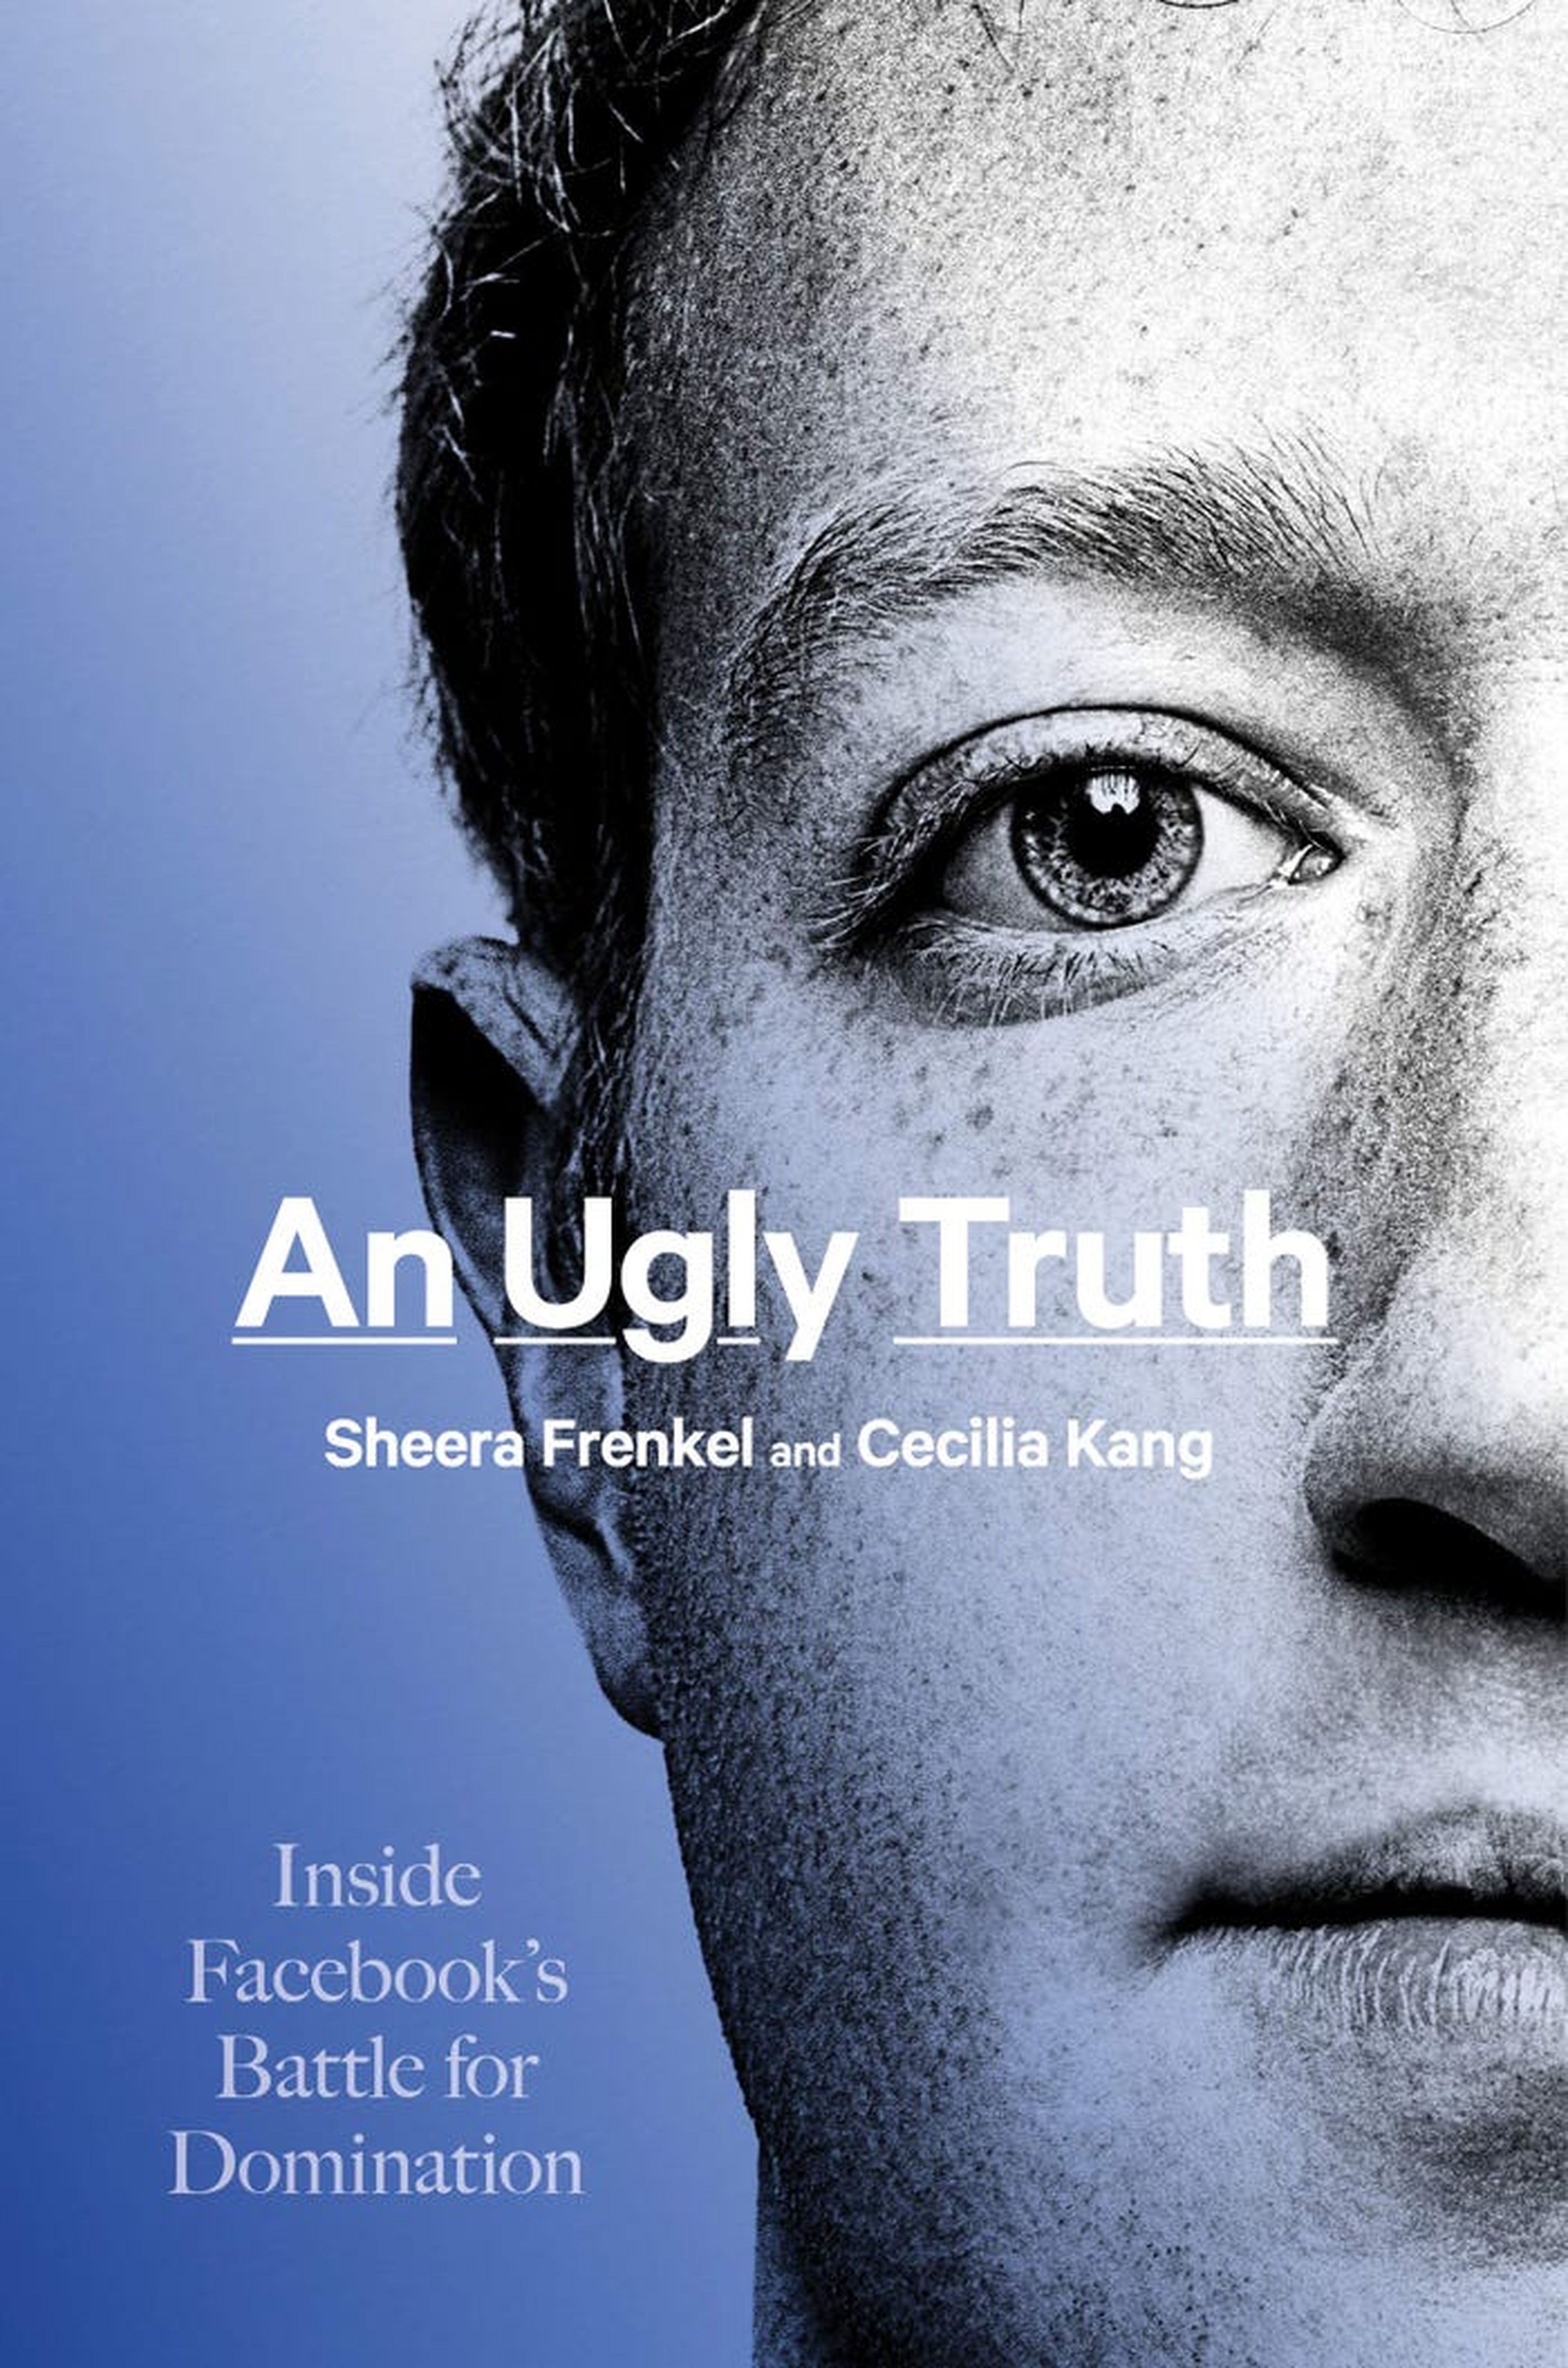 'An Ugly Truth: Inside Facebook's Battle for Domination'